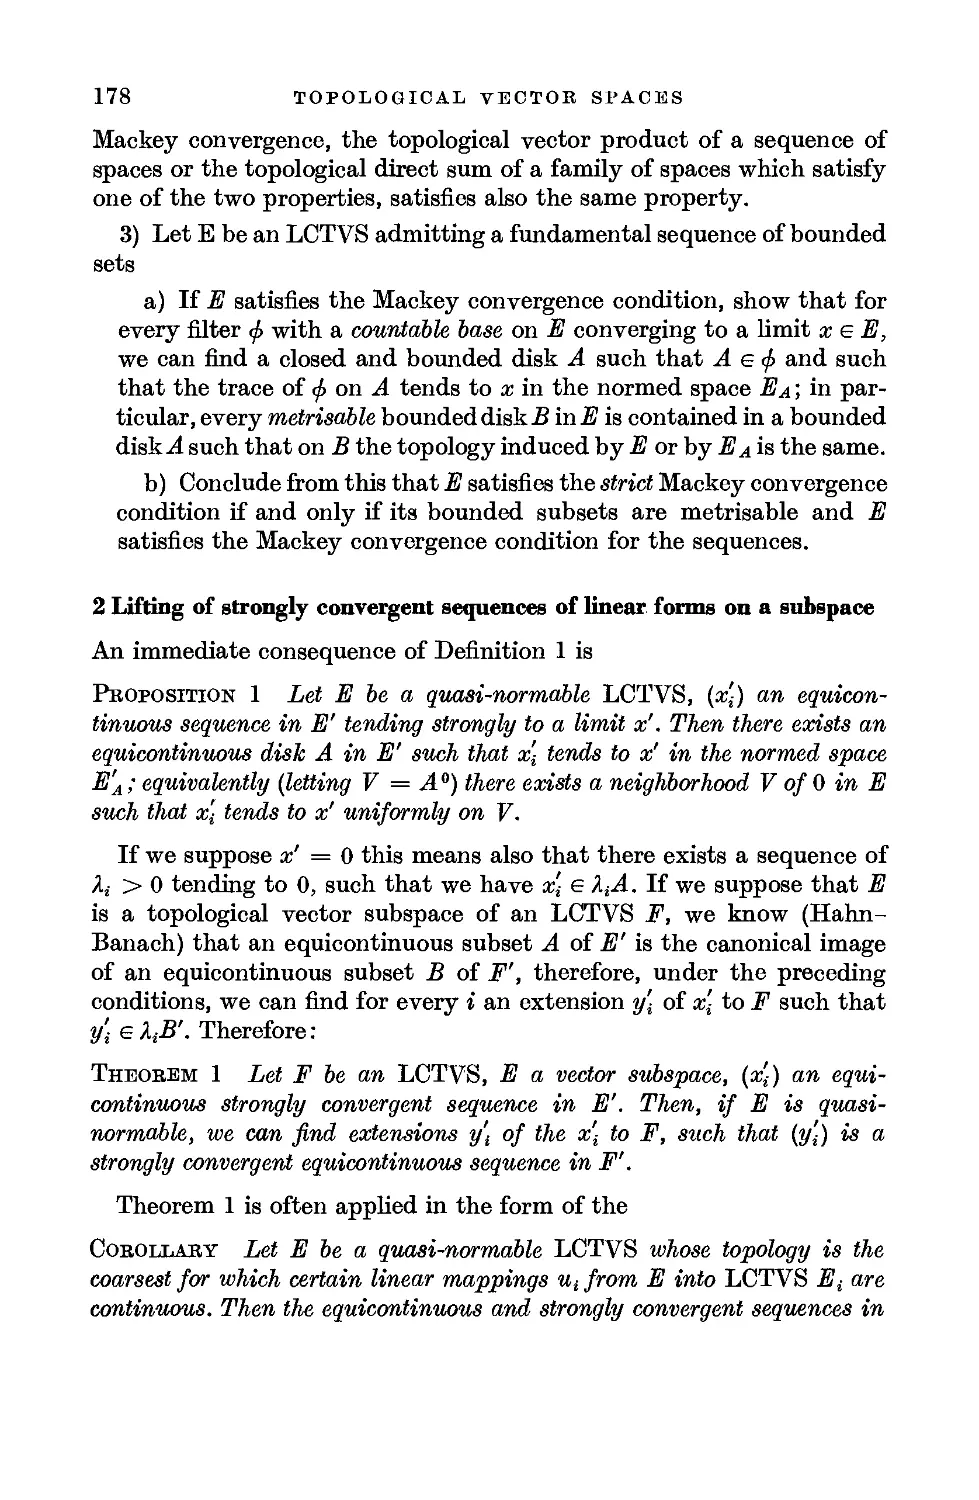 2. Lifting of strongly convergent sequences of linear forms on a subspace